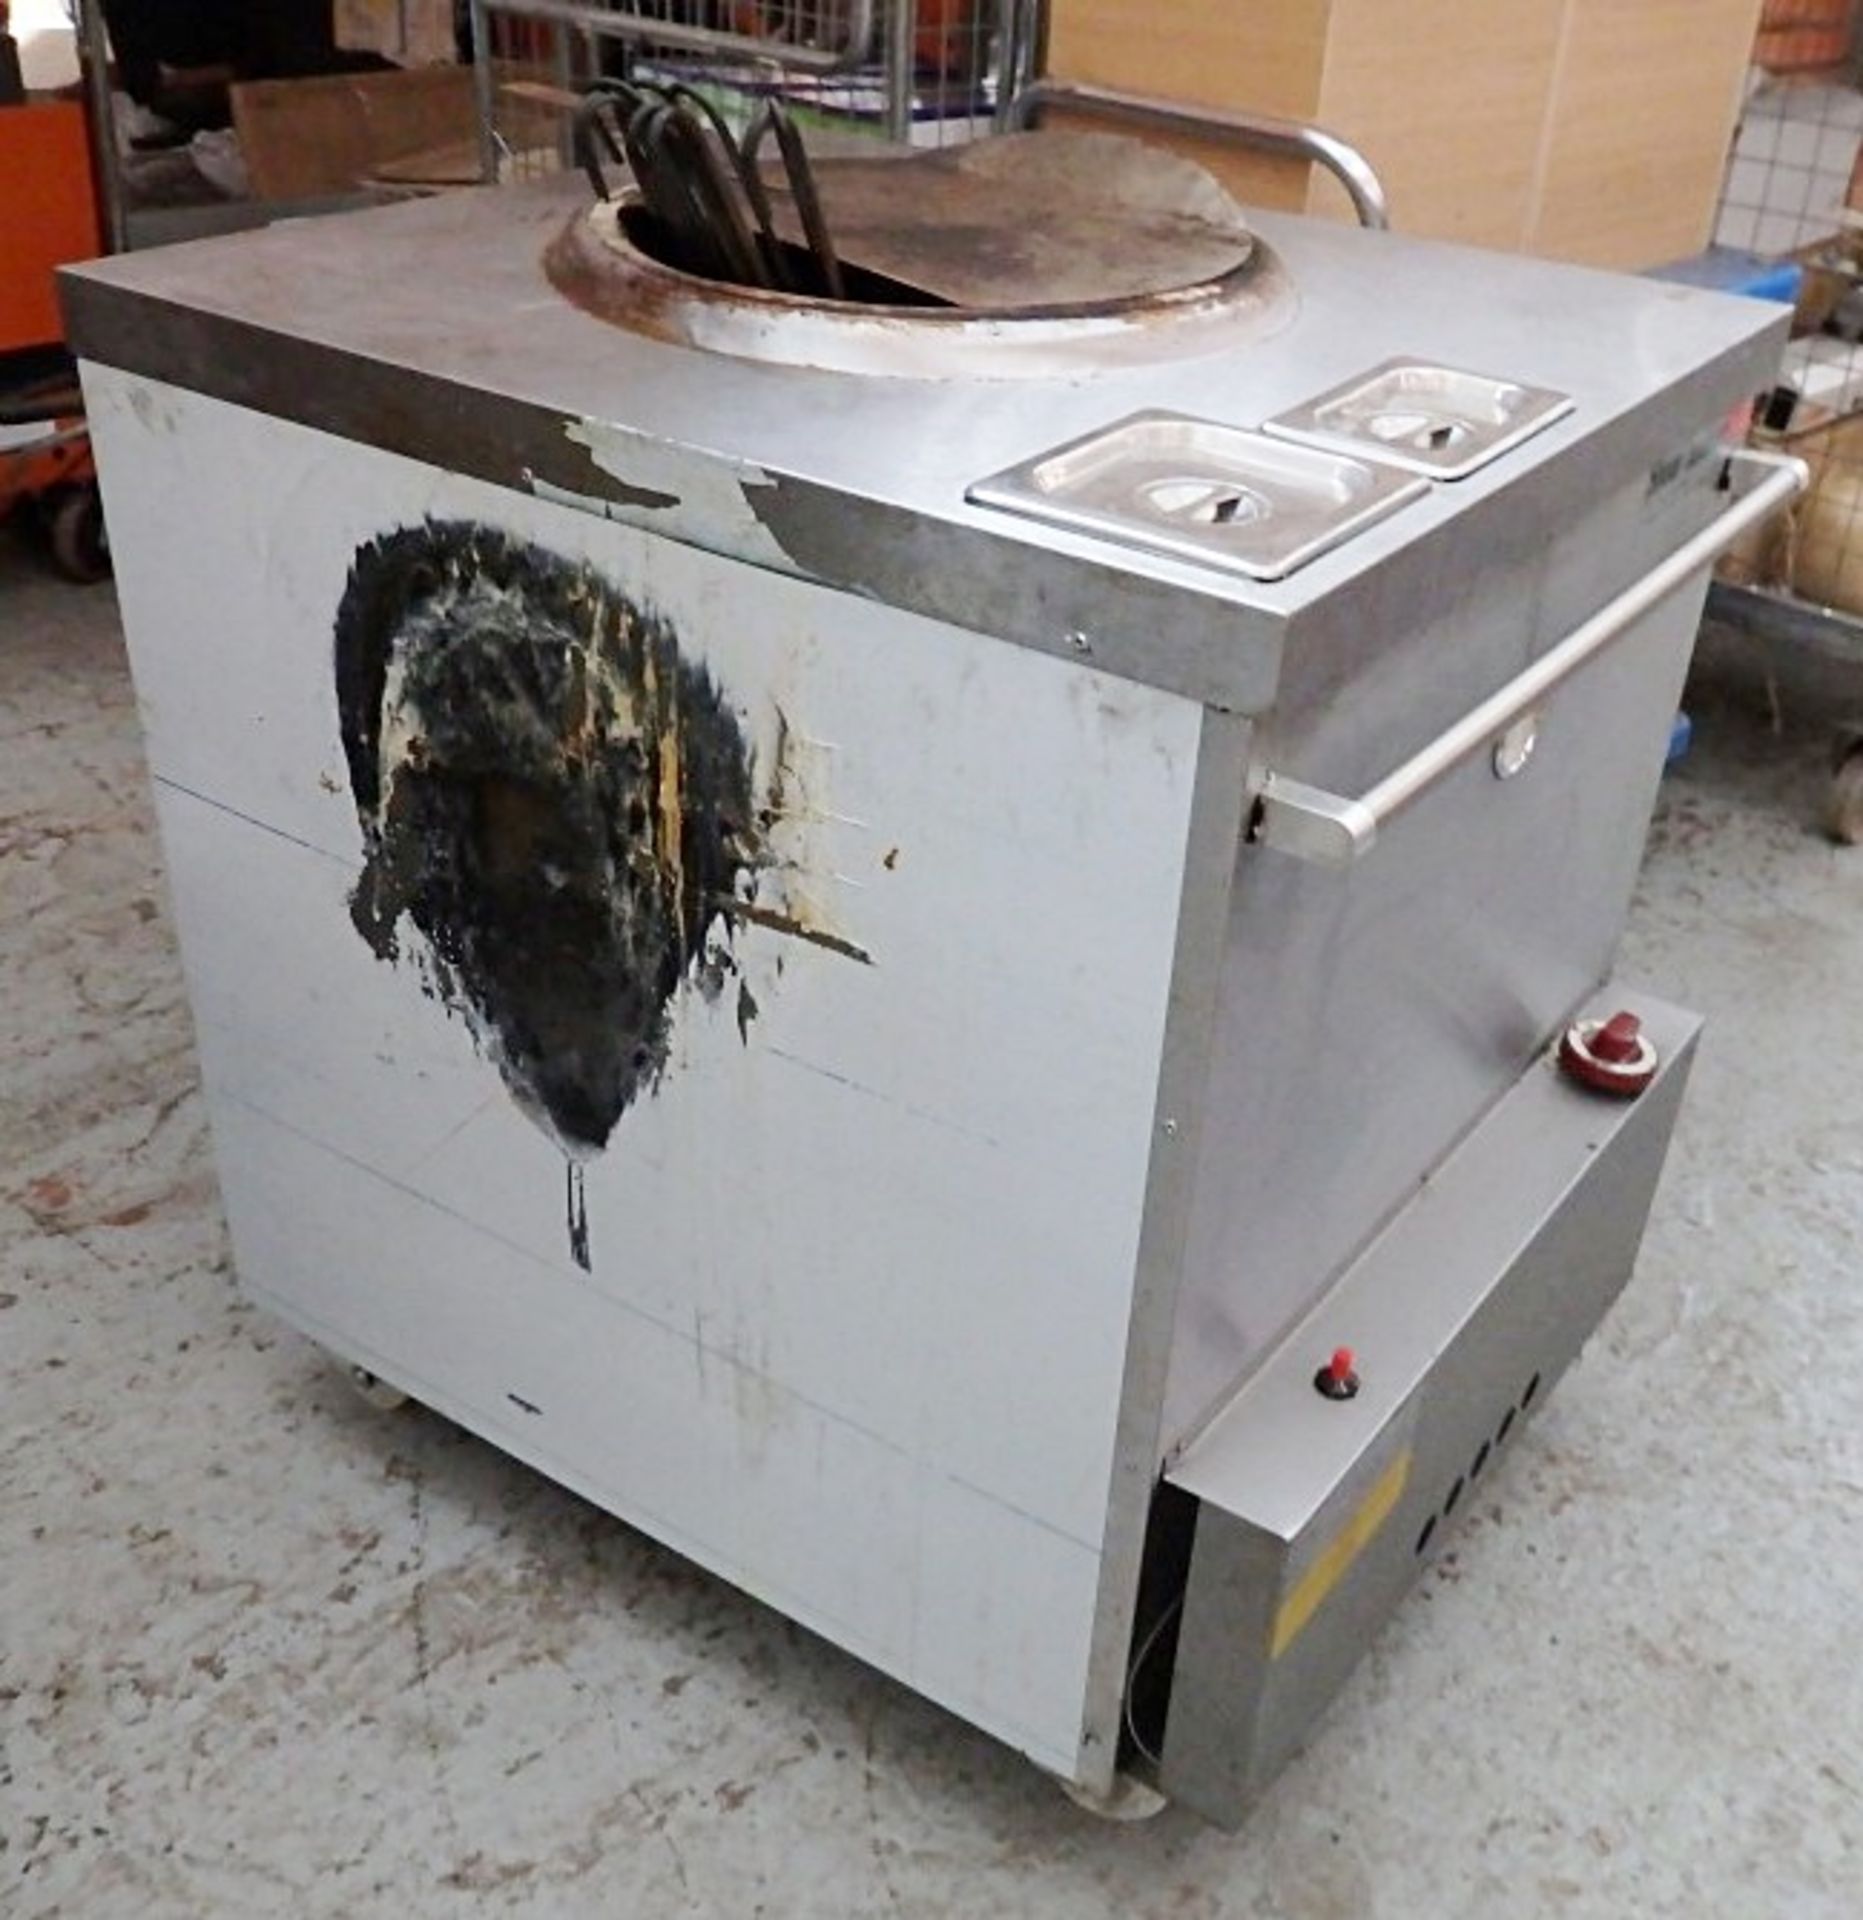 1 x Shaan Tandoori Commercial Oven - Dimensions: W71 x D76 x H86cm - Also Includes Skewers - Ref: - Image 9 of 9